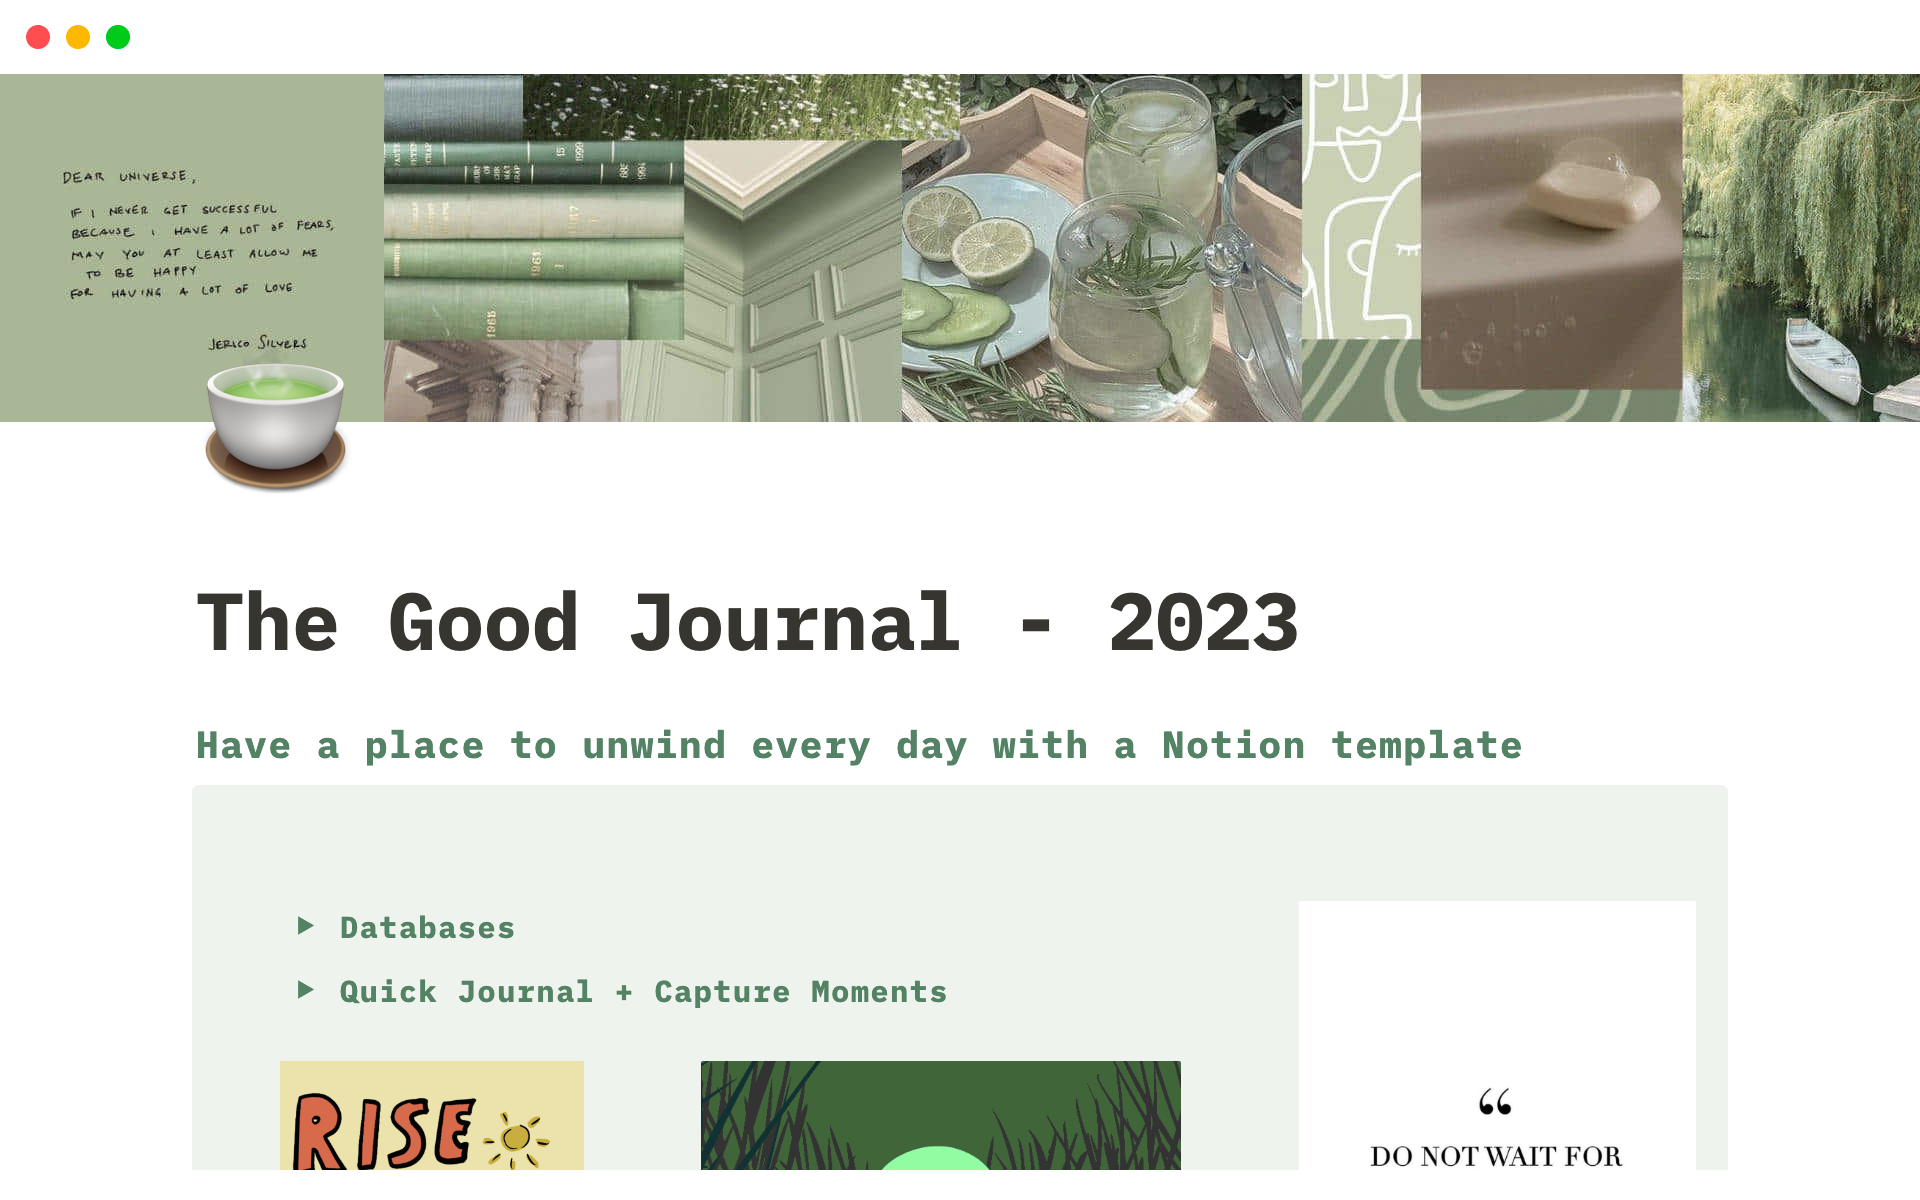 It is a Journal with some unique features.